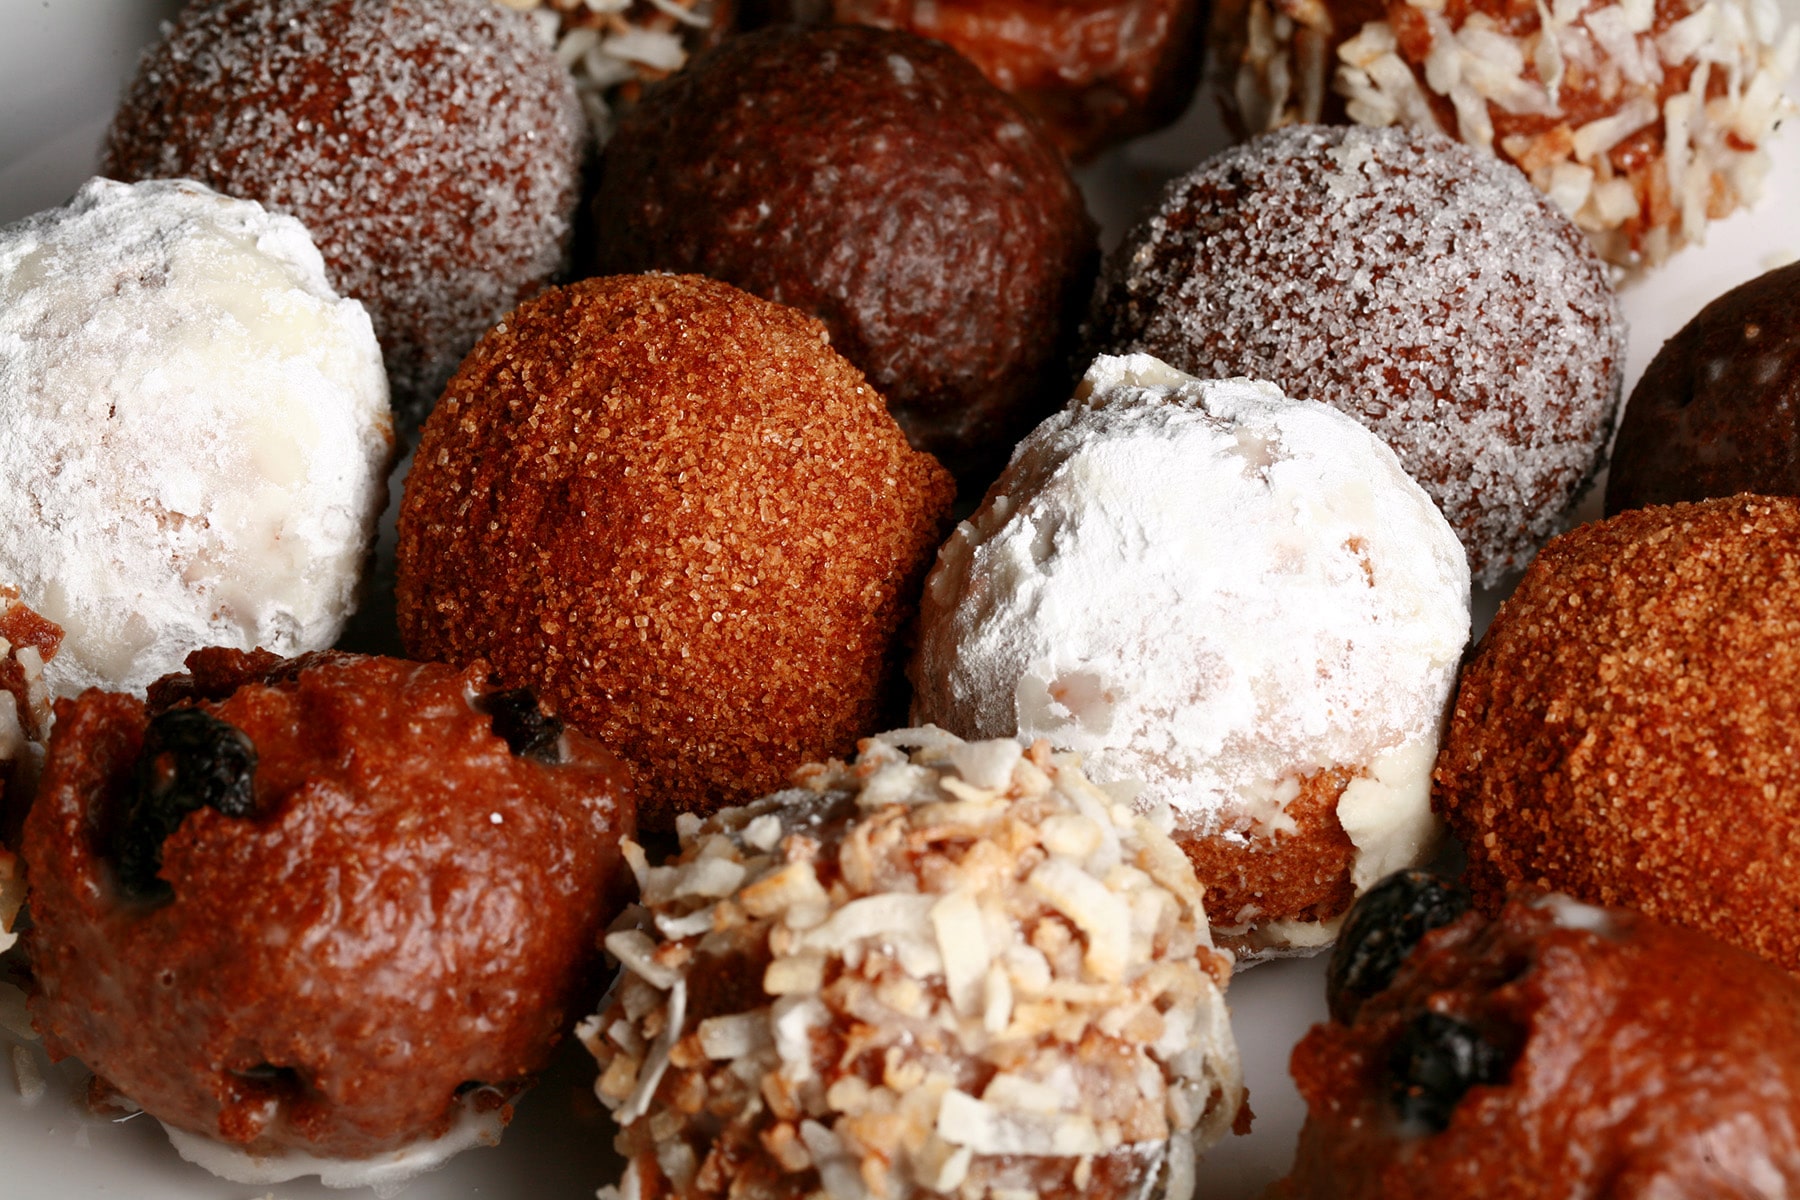 A close up view of an assortment of homemade donut holes: Toasted coconut, chocolate glazed, cinnamon sugar, powdered sugar, and dutchie versions are all visible.